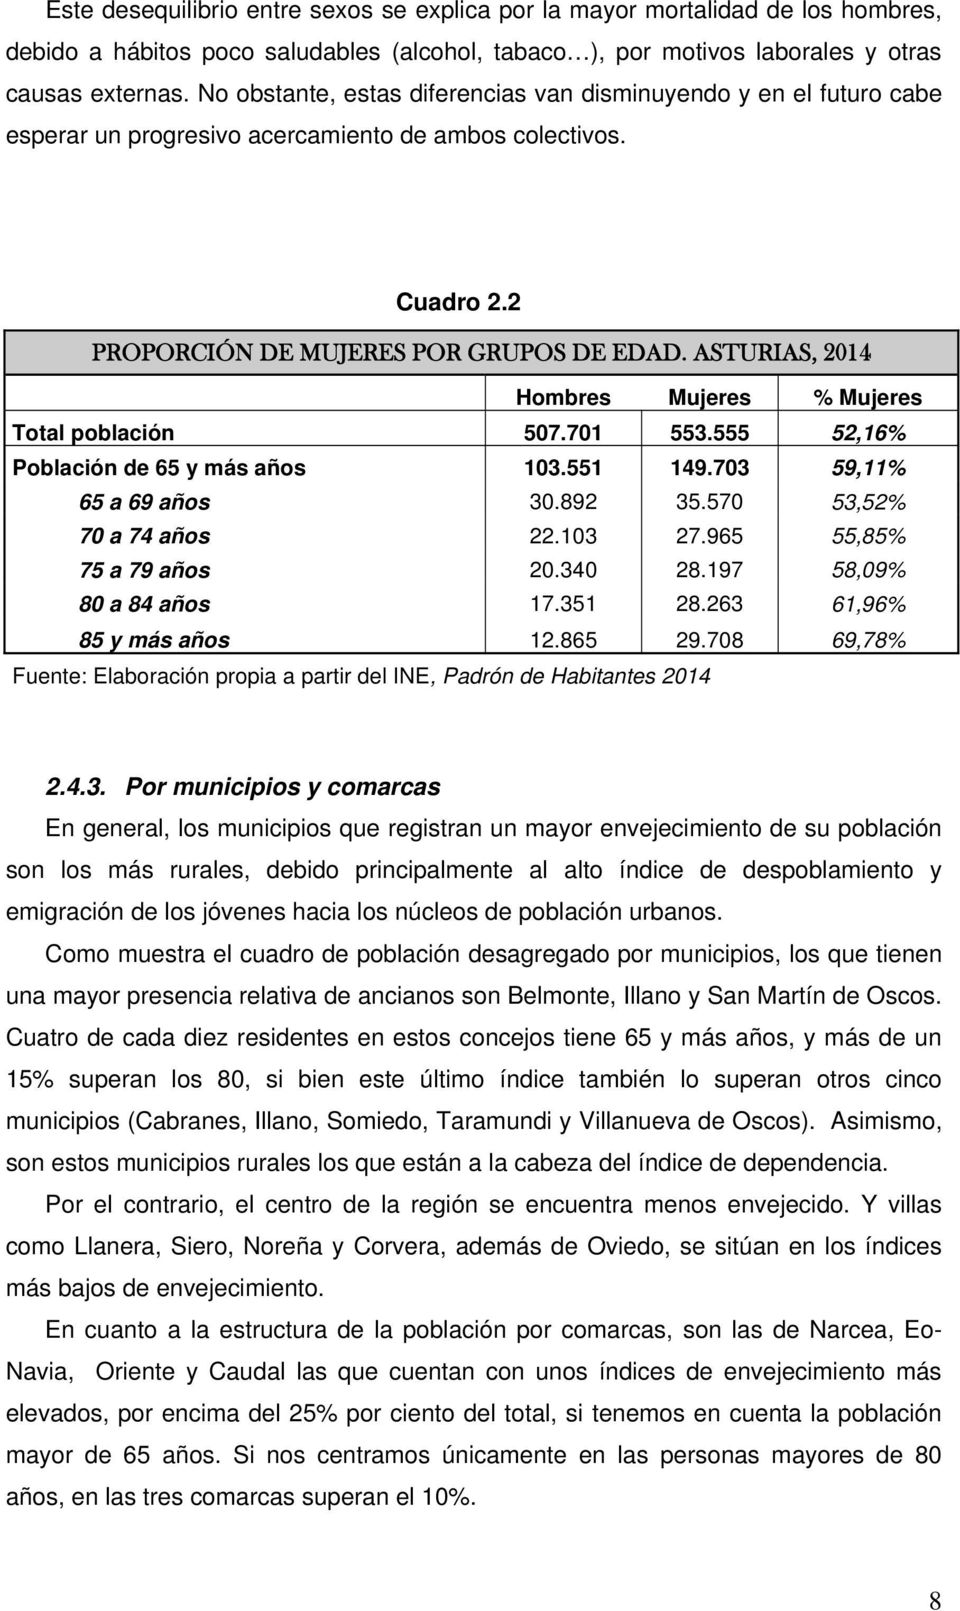 ASTURIAS, 2014 Hombres Mujeres % Mujeres Total población 507.701 553.555 52,16% Población de 65 y más años 103.551 149.703 59,11% 65 a 69 años 30.892 35.570 53,52% 70 a 74 años 22.103 27.